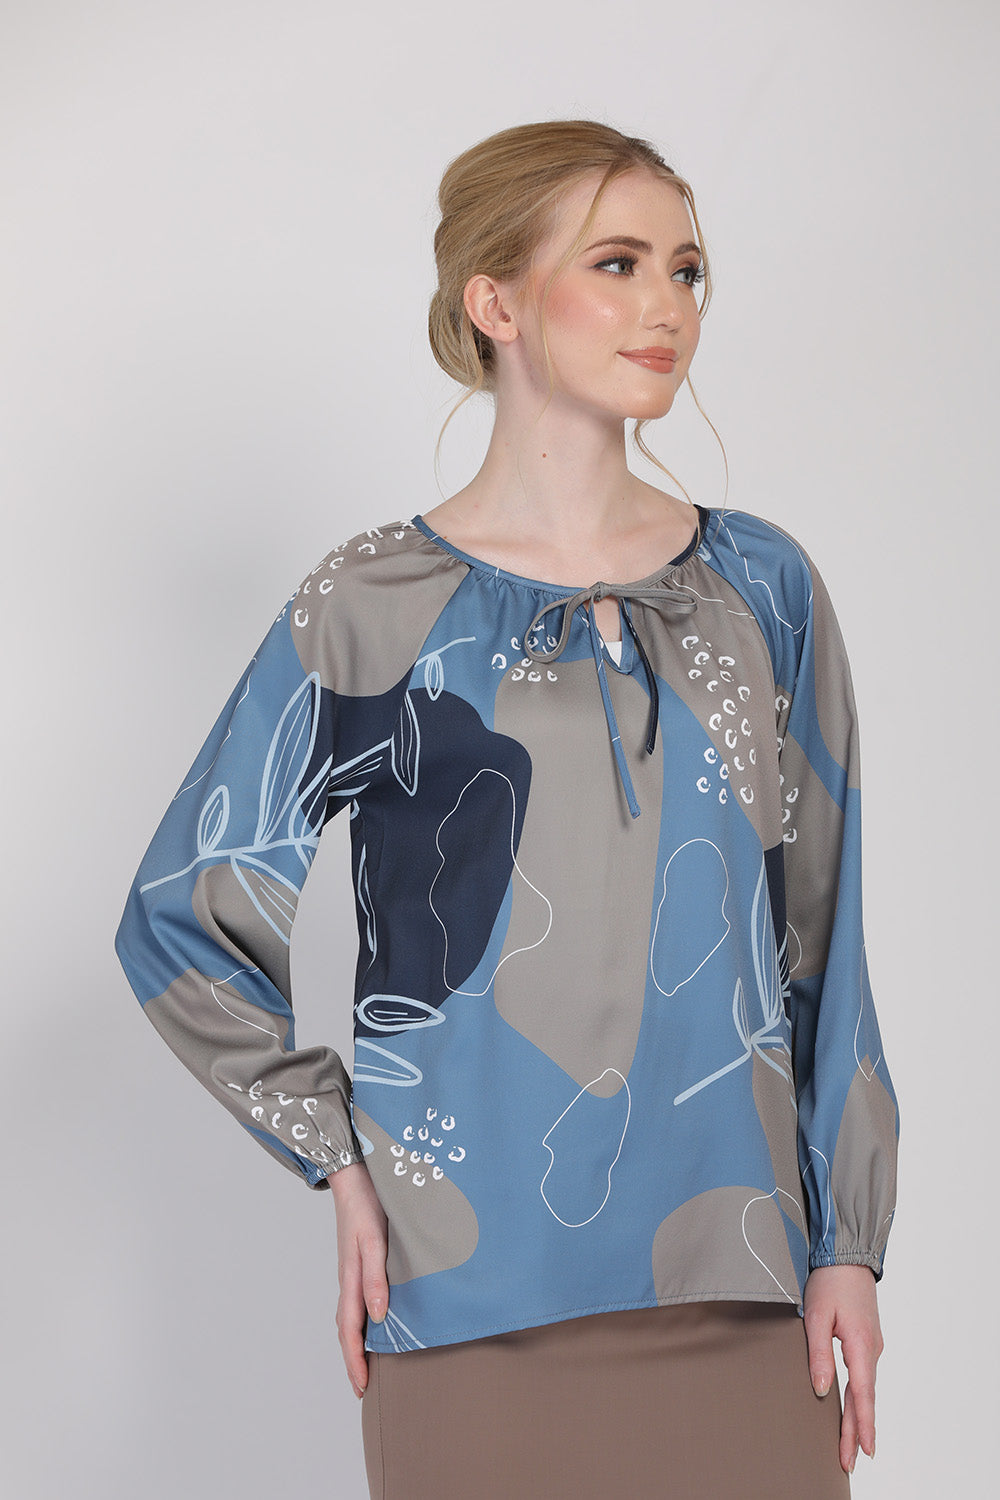 The Ceria 2.0 Blouse in Dusty Blue